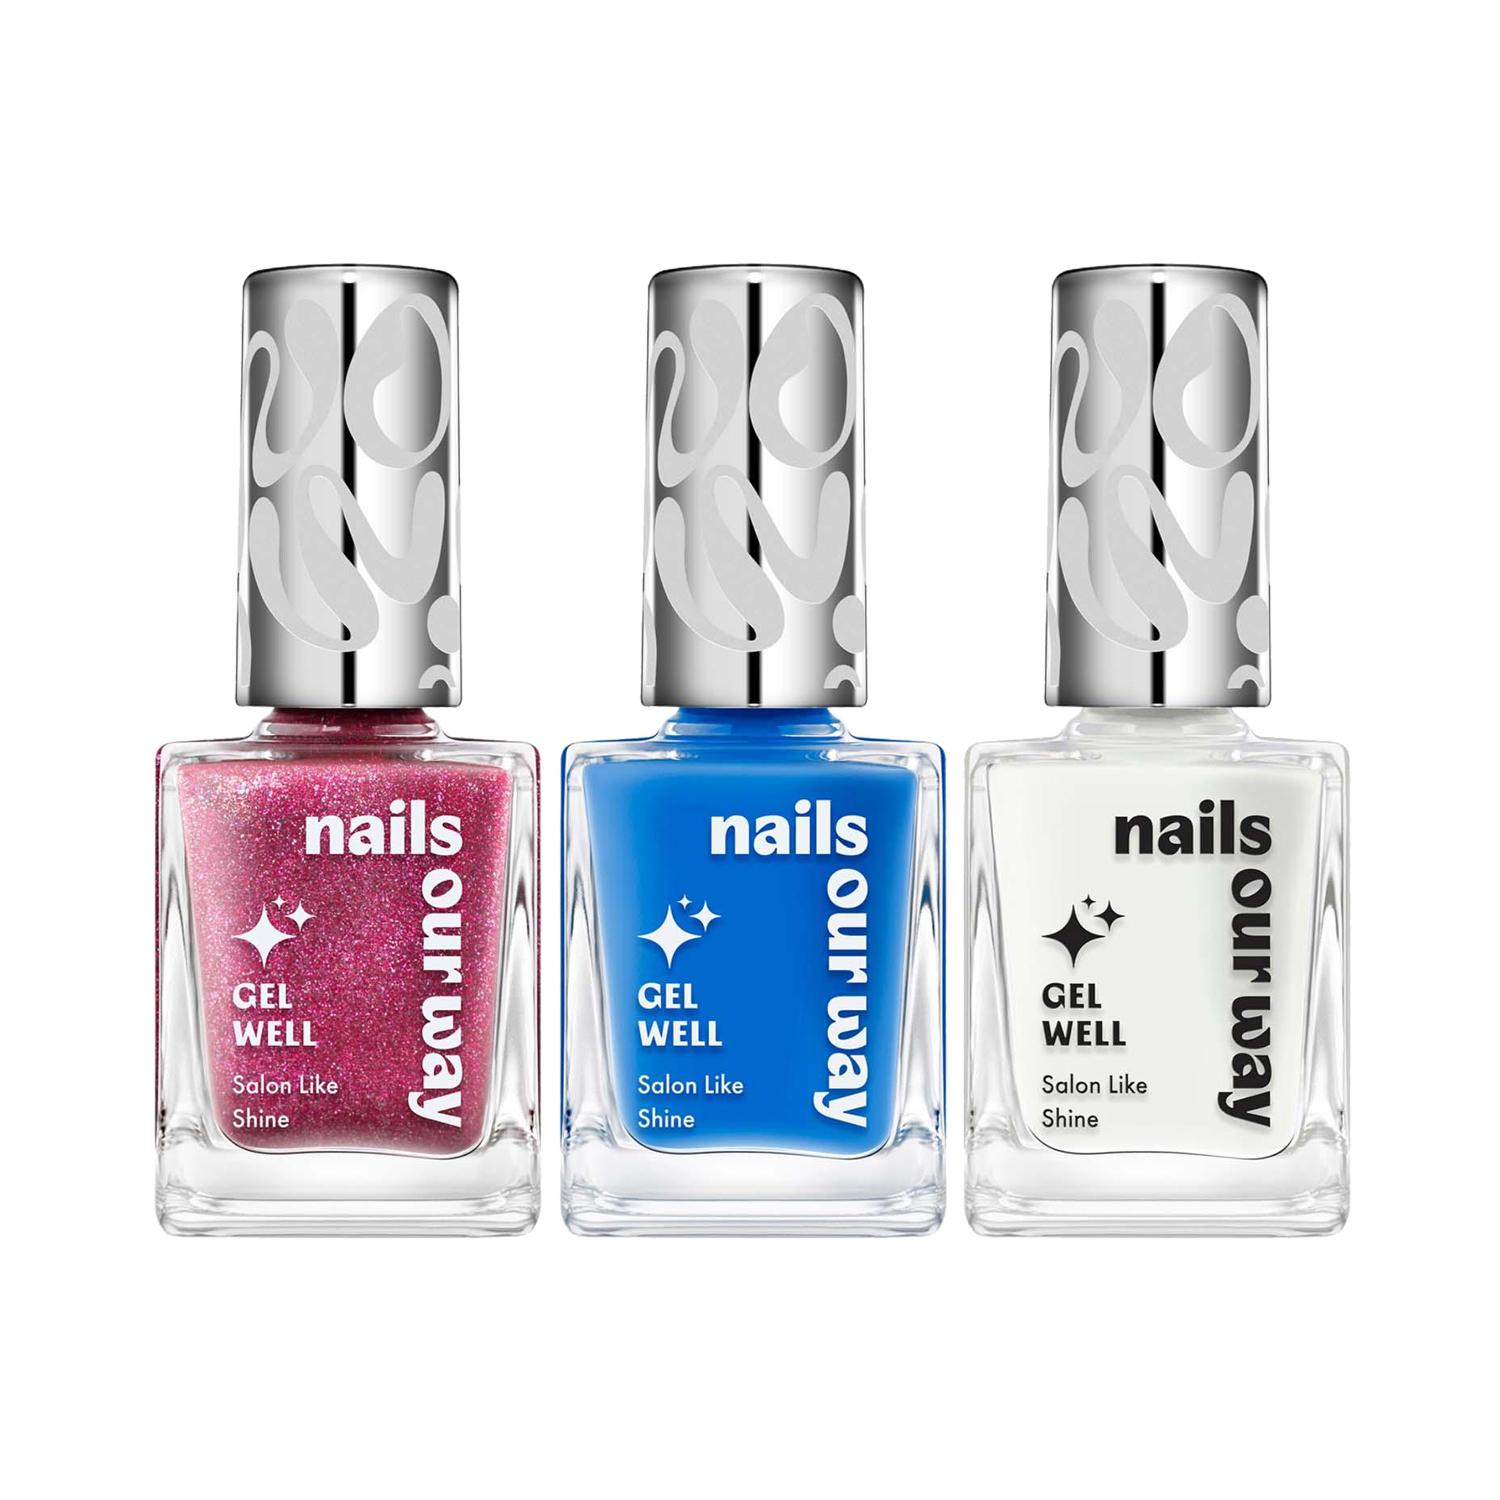 Nails Our Way | Nails Our Way Gel Well Nail Enamel Blue Blush Combo - Pk3